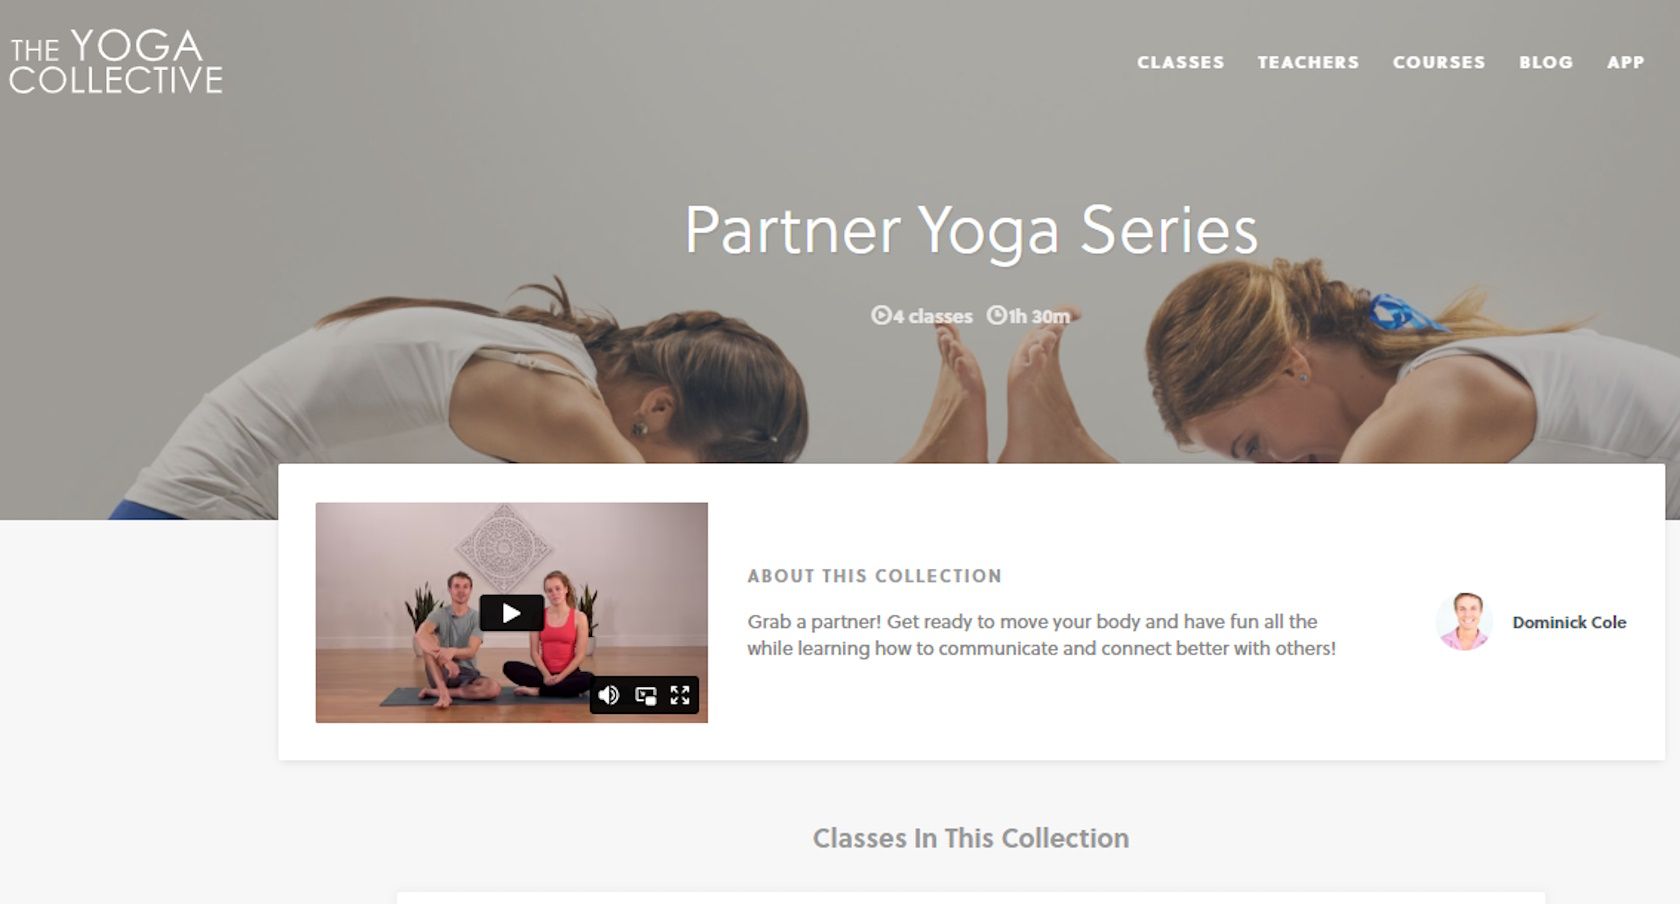 The yoga collective online partner yoga series